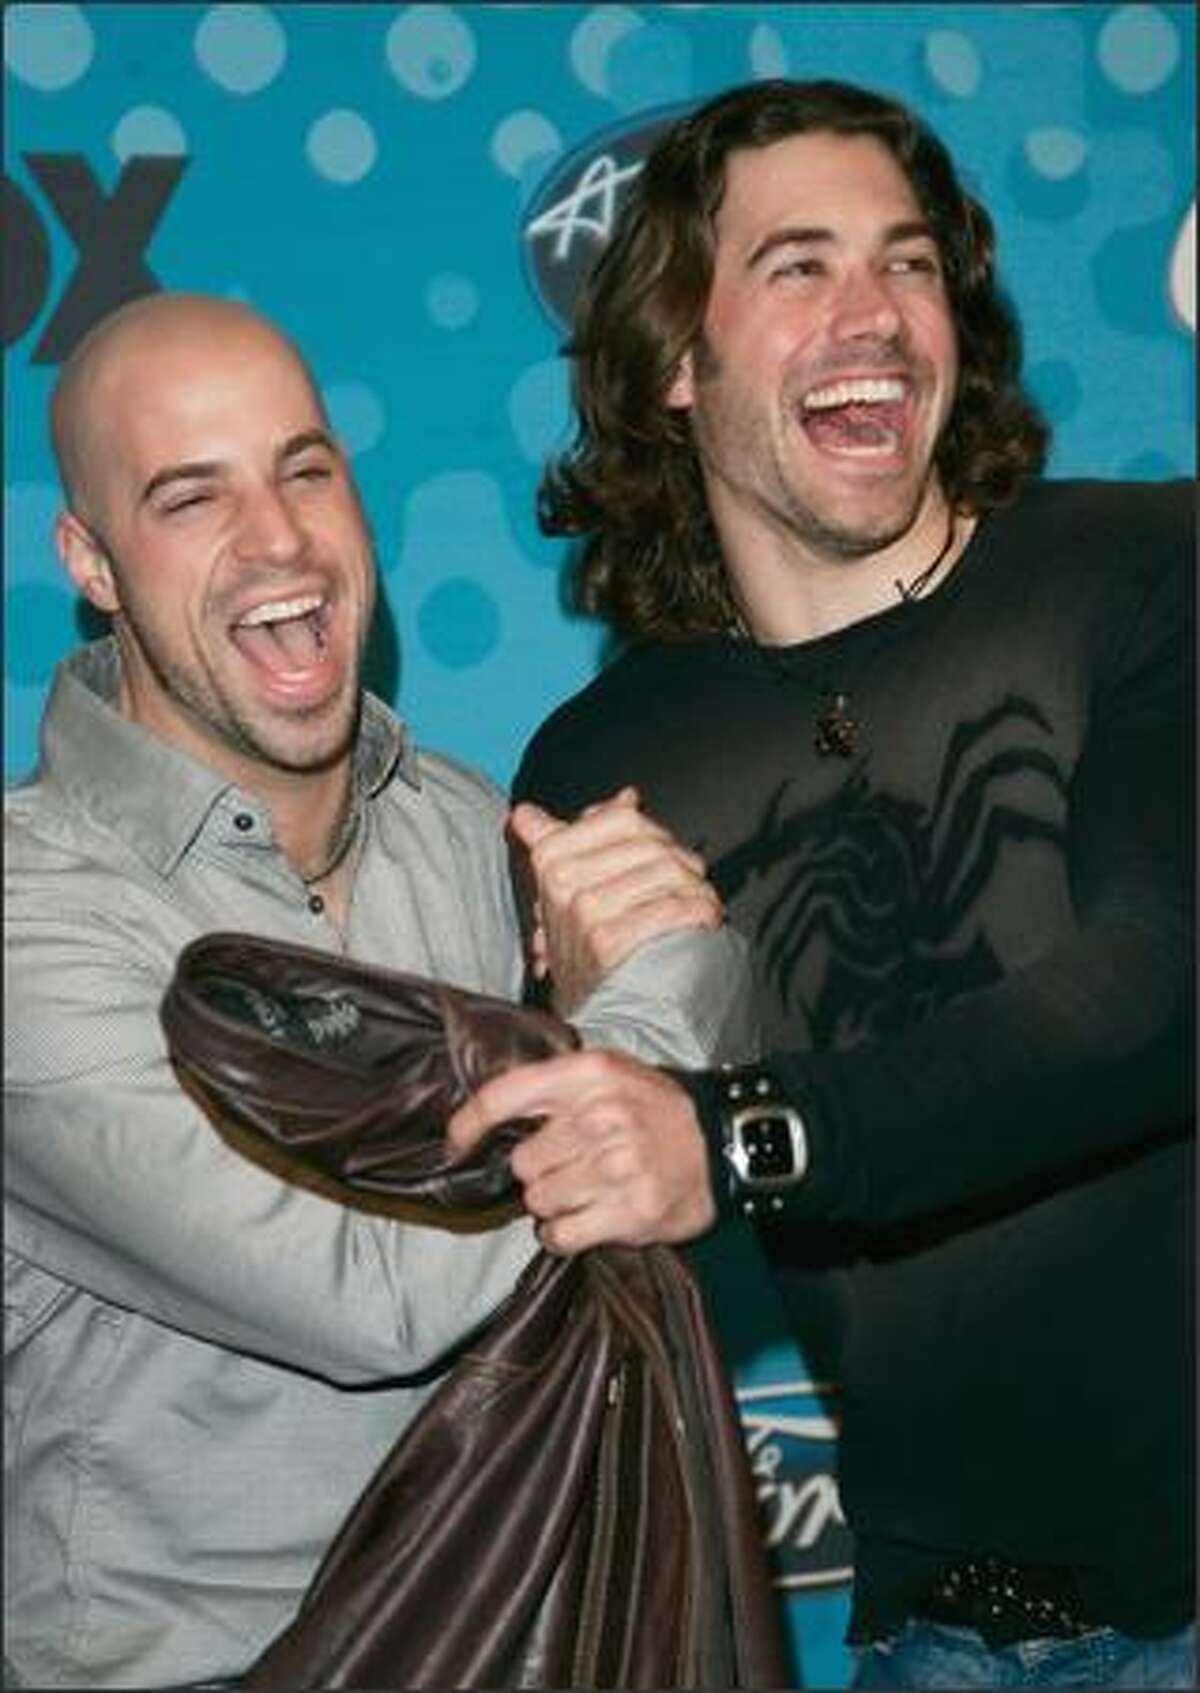 "American Idol" contestants Chris Daughtry, 26, and Ace Young, 25, are happy campers at the "American Idol" Final 12 Party in Hollywood on Thursday. The party included a reunion for season four contestants (and long-haired rockers) Constantine Meroulis and Bo Bice.